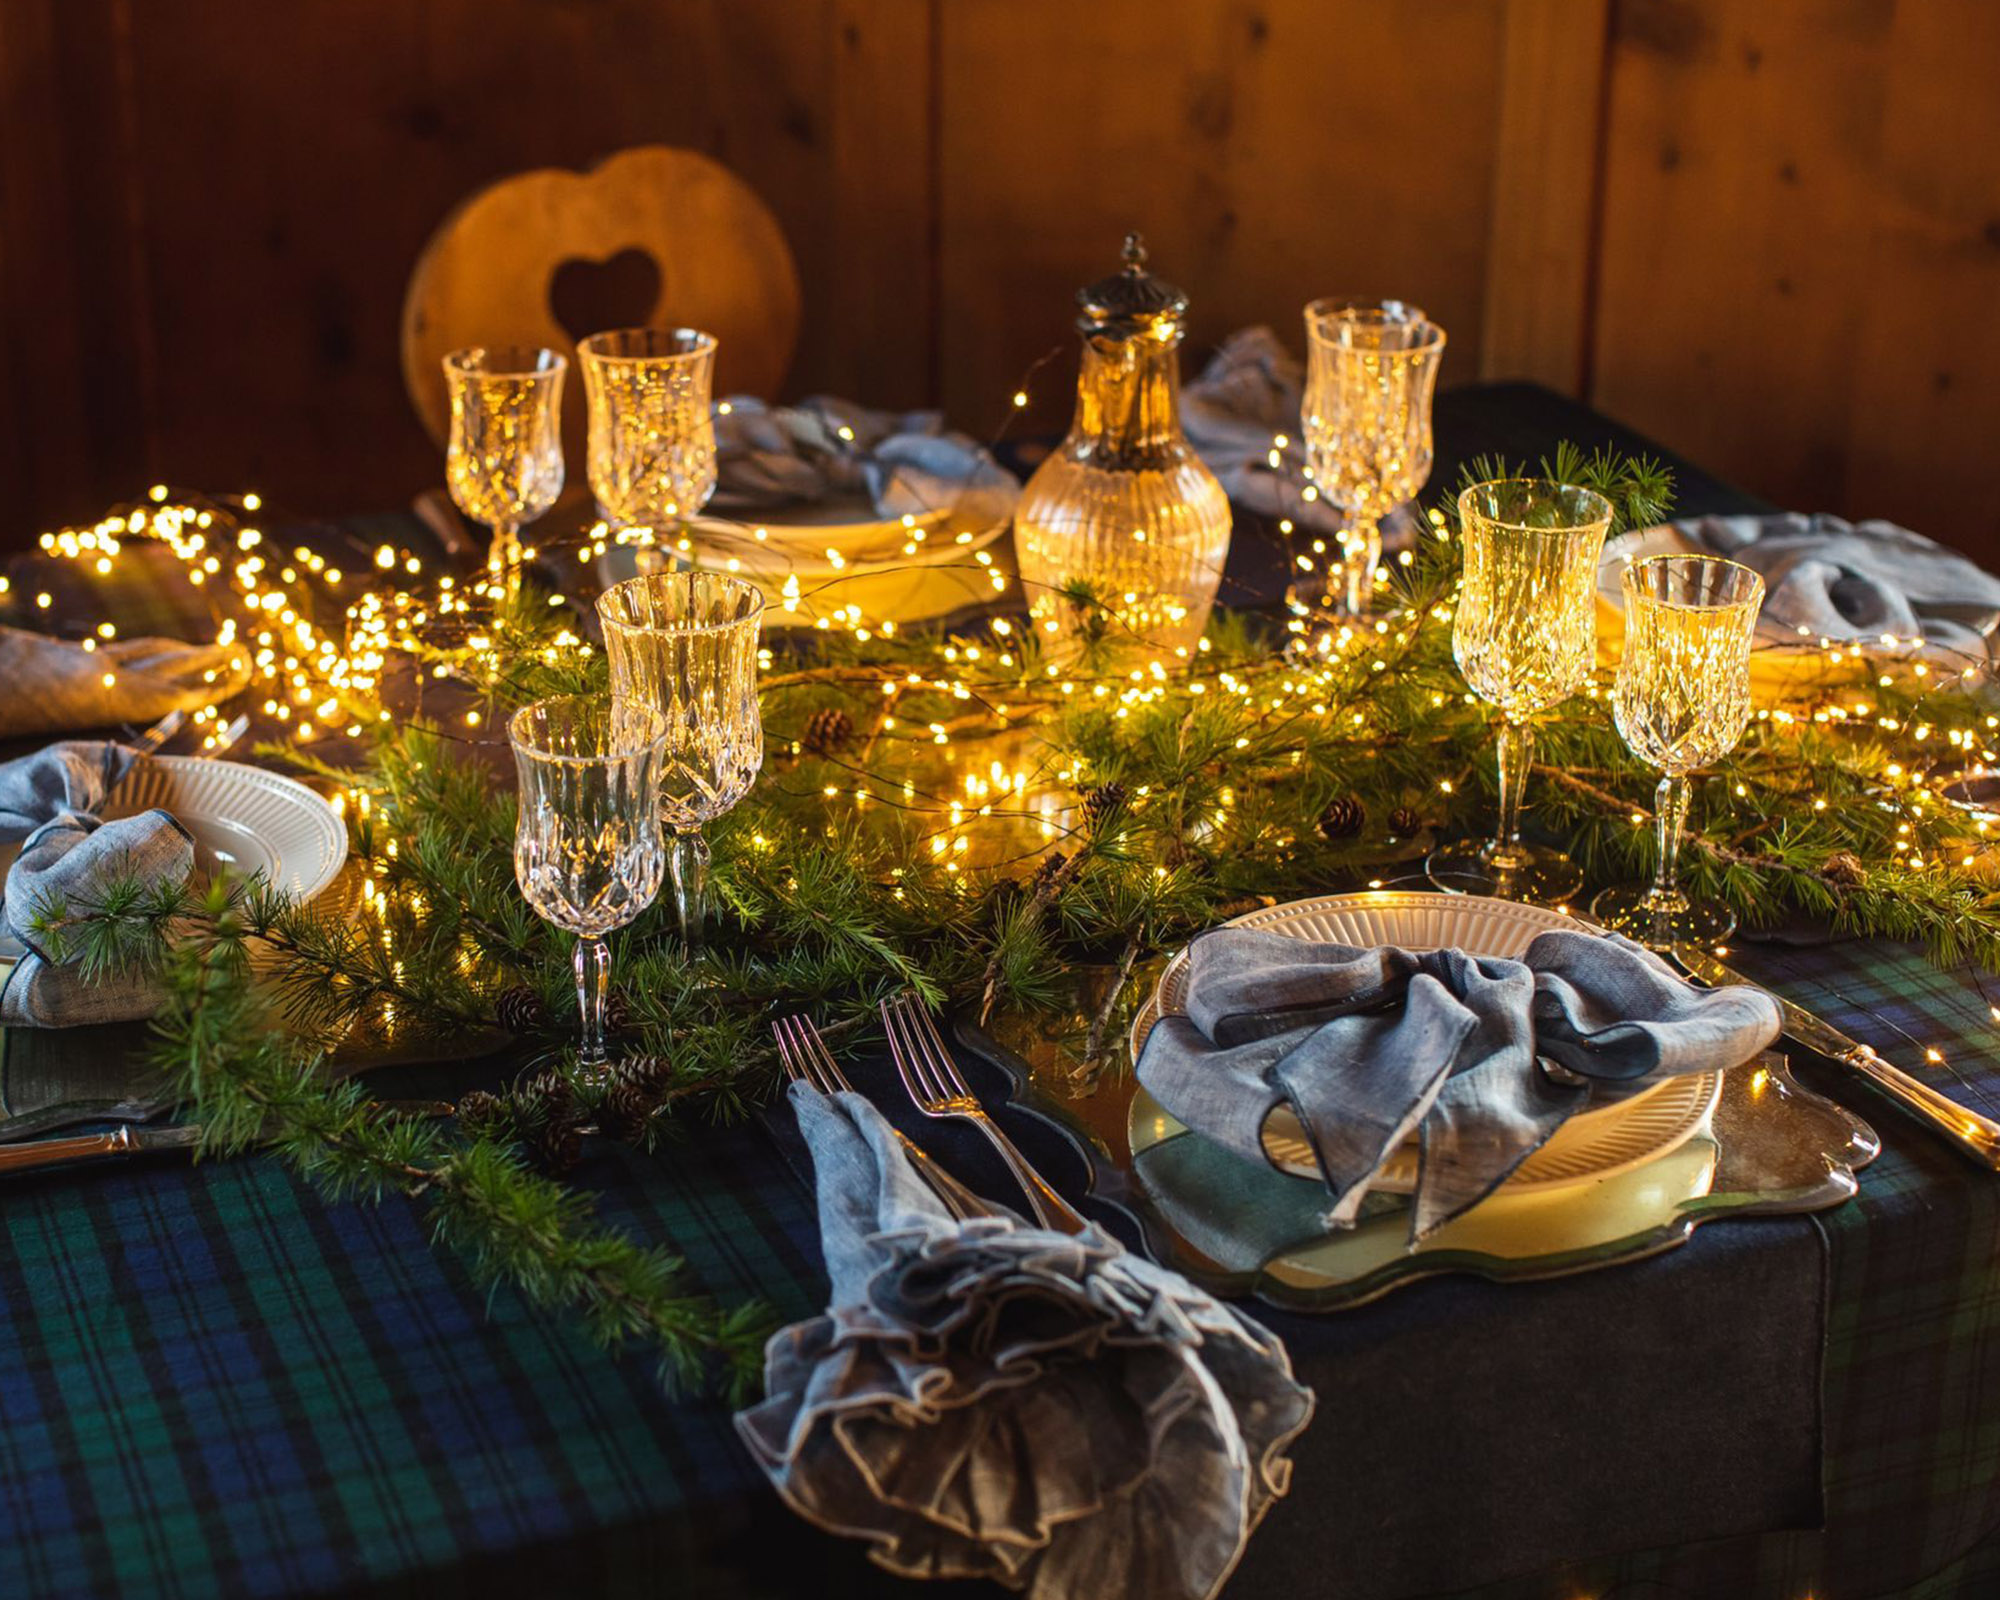 How to illuminate the Christmas table